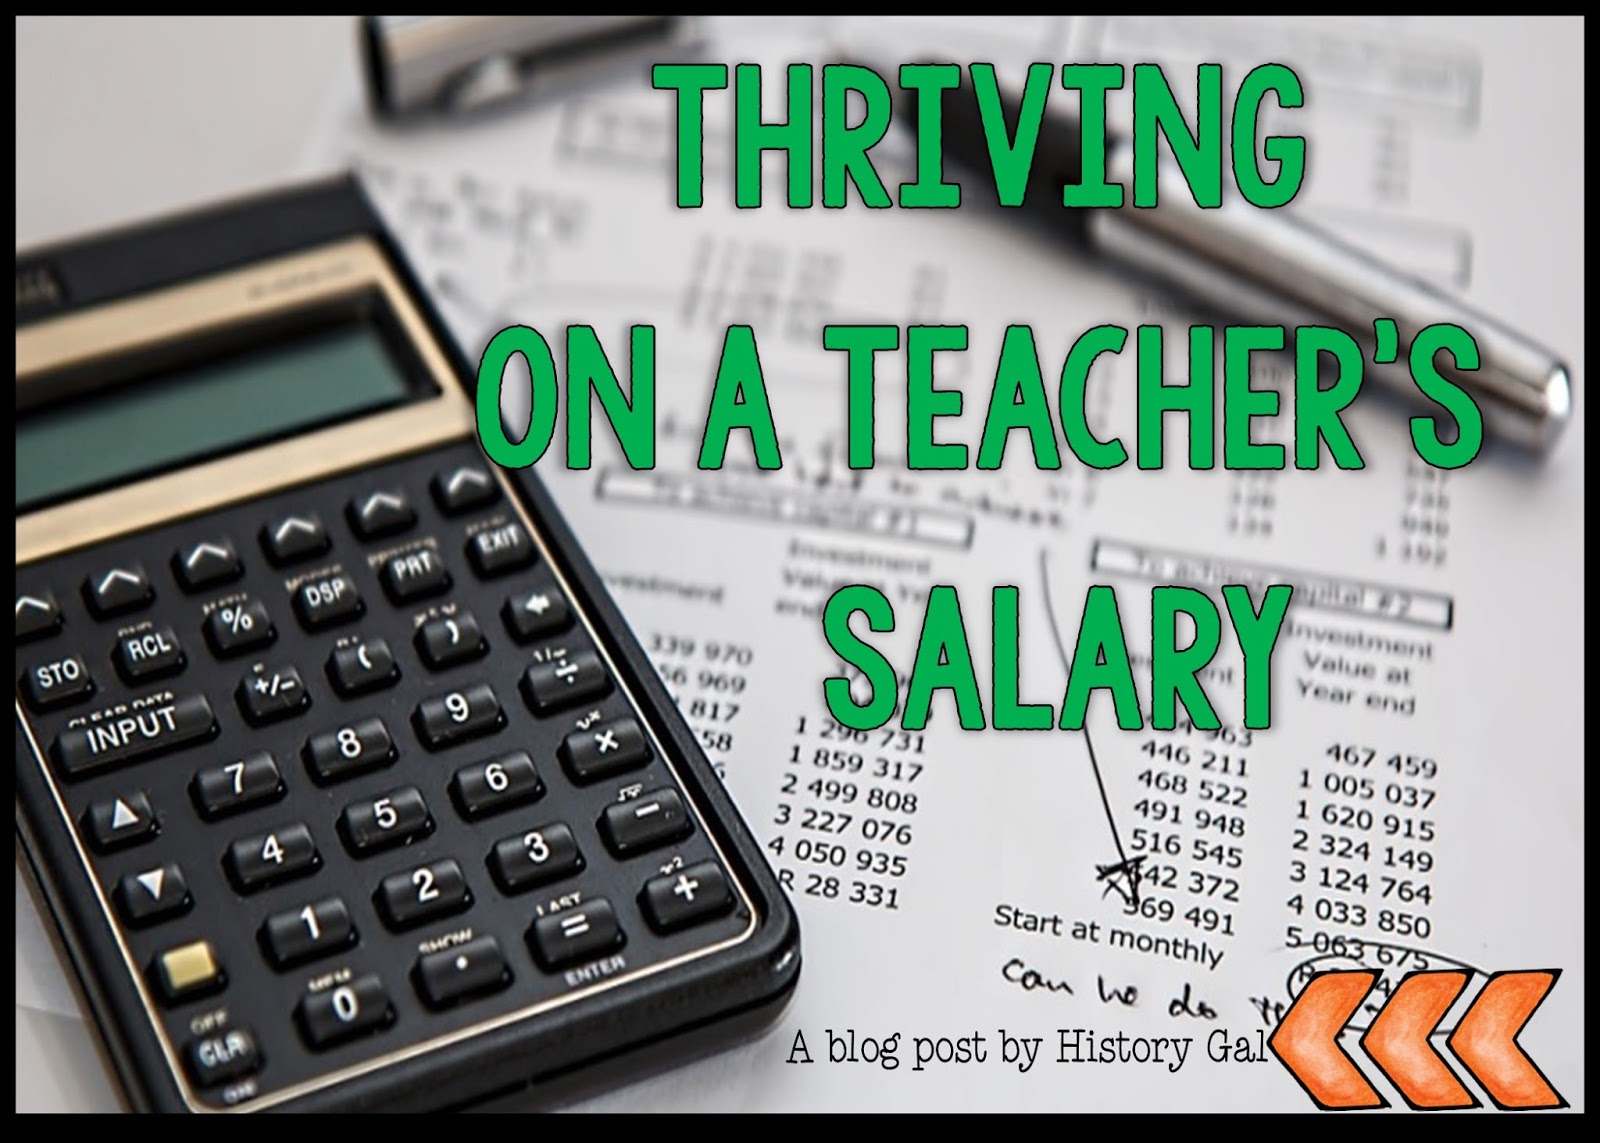 Thriving on a Teacher's Salary By History Gal